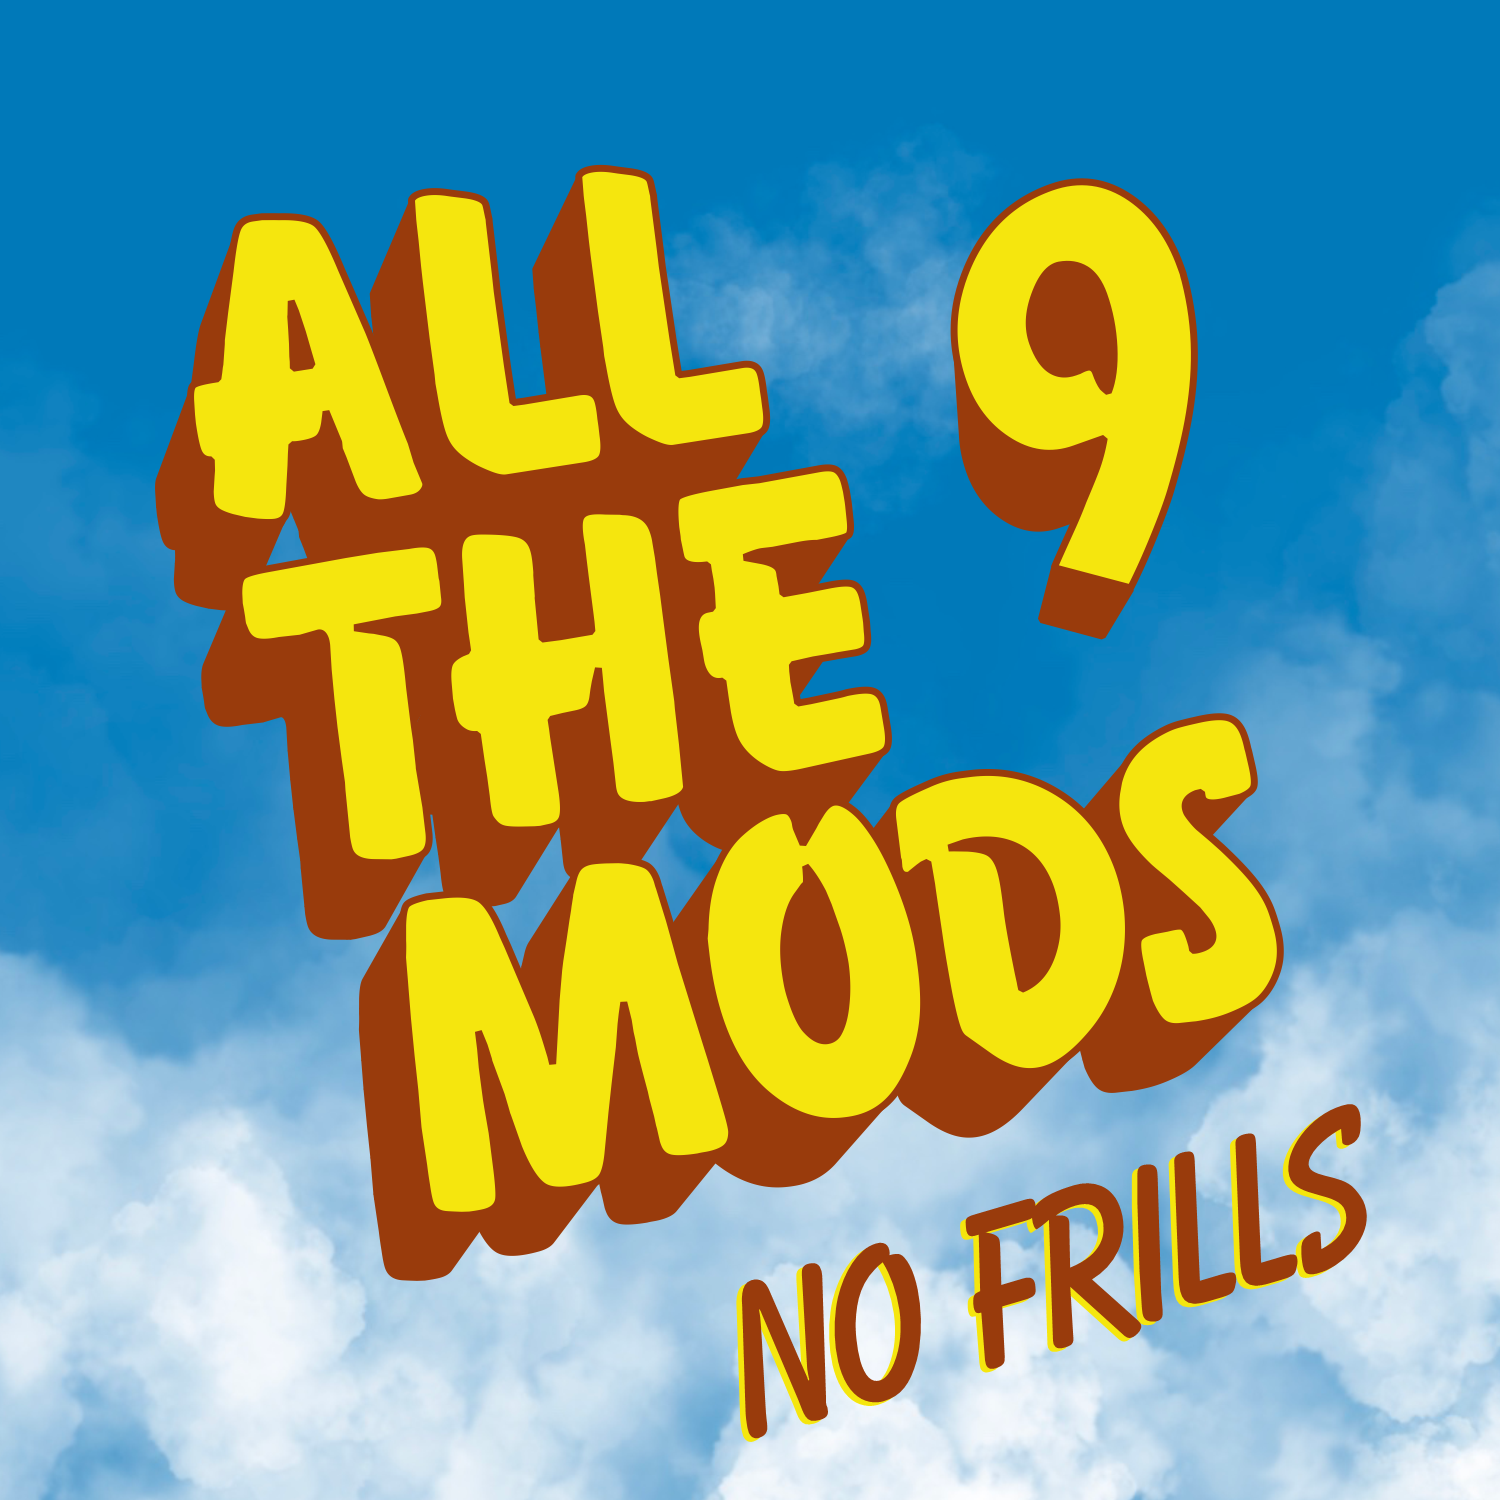 All the Mods 9 - No Frills project avatar